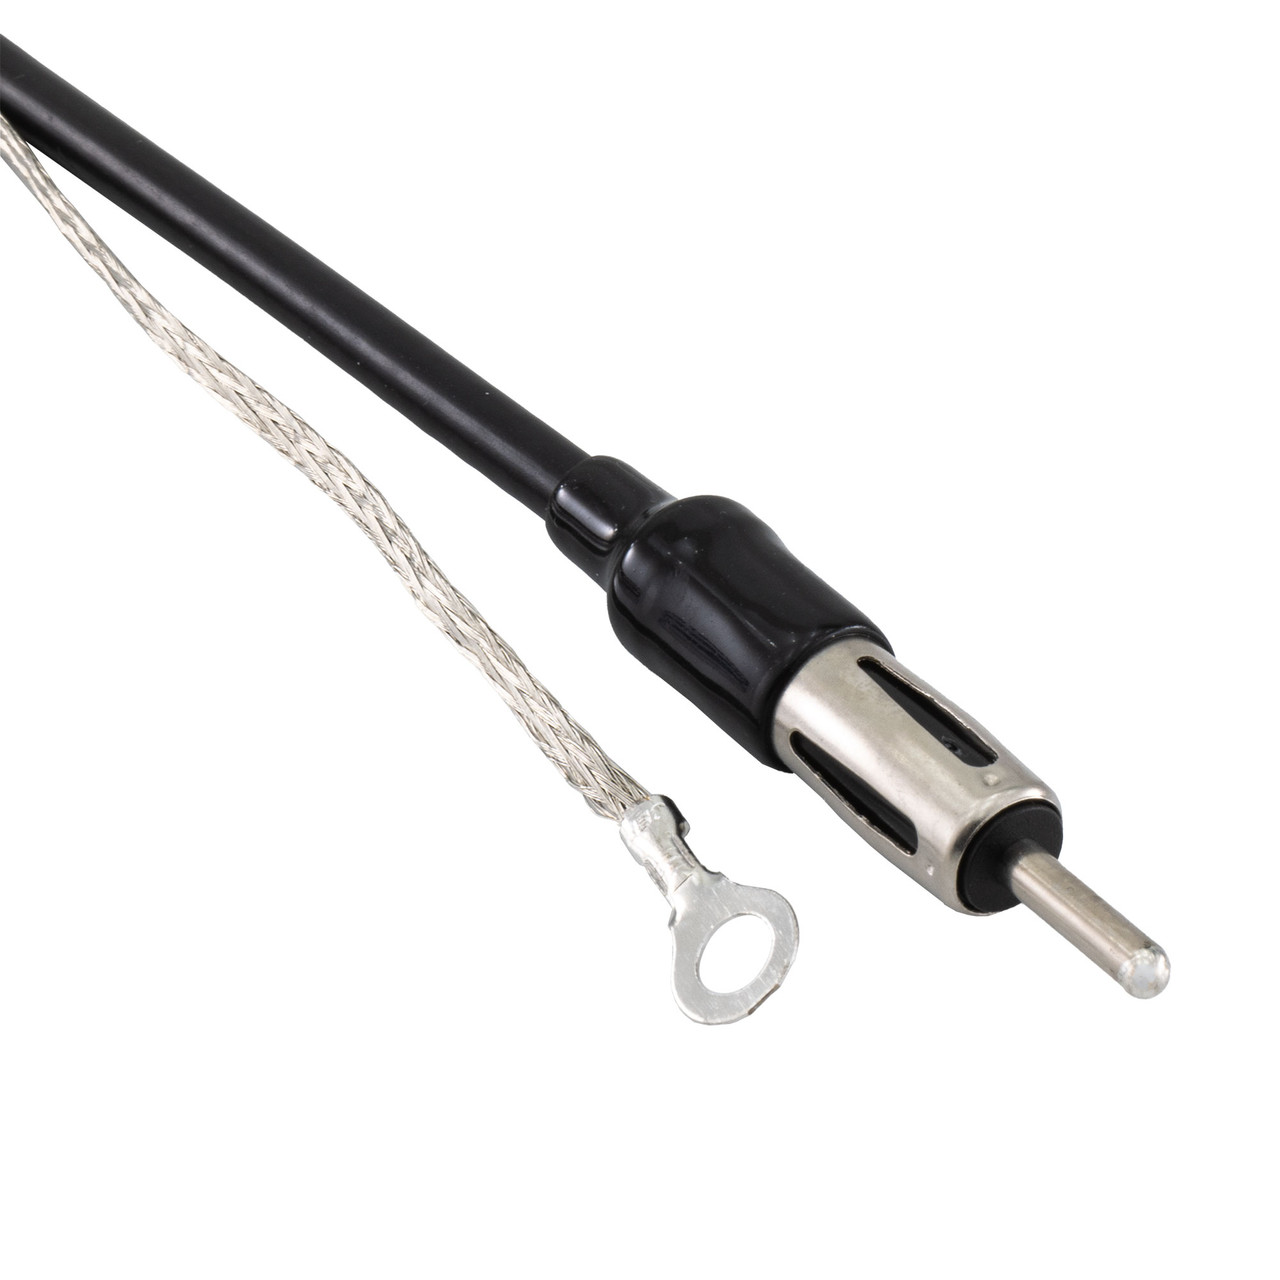 RV Radio Antenna with 72 cable